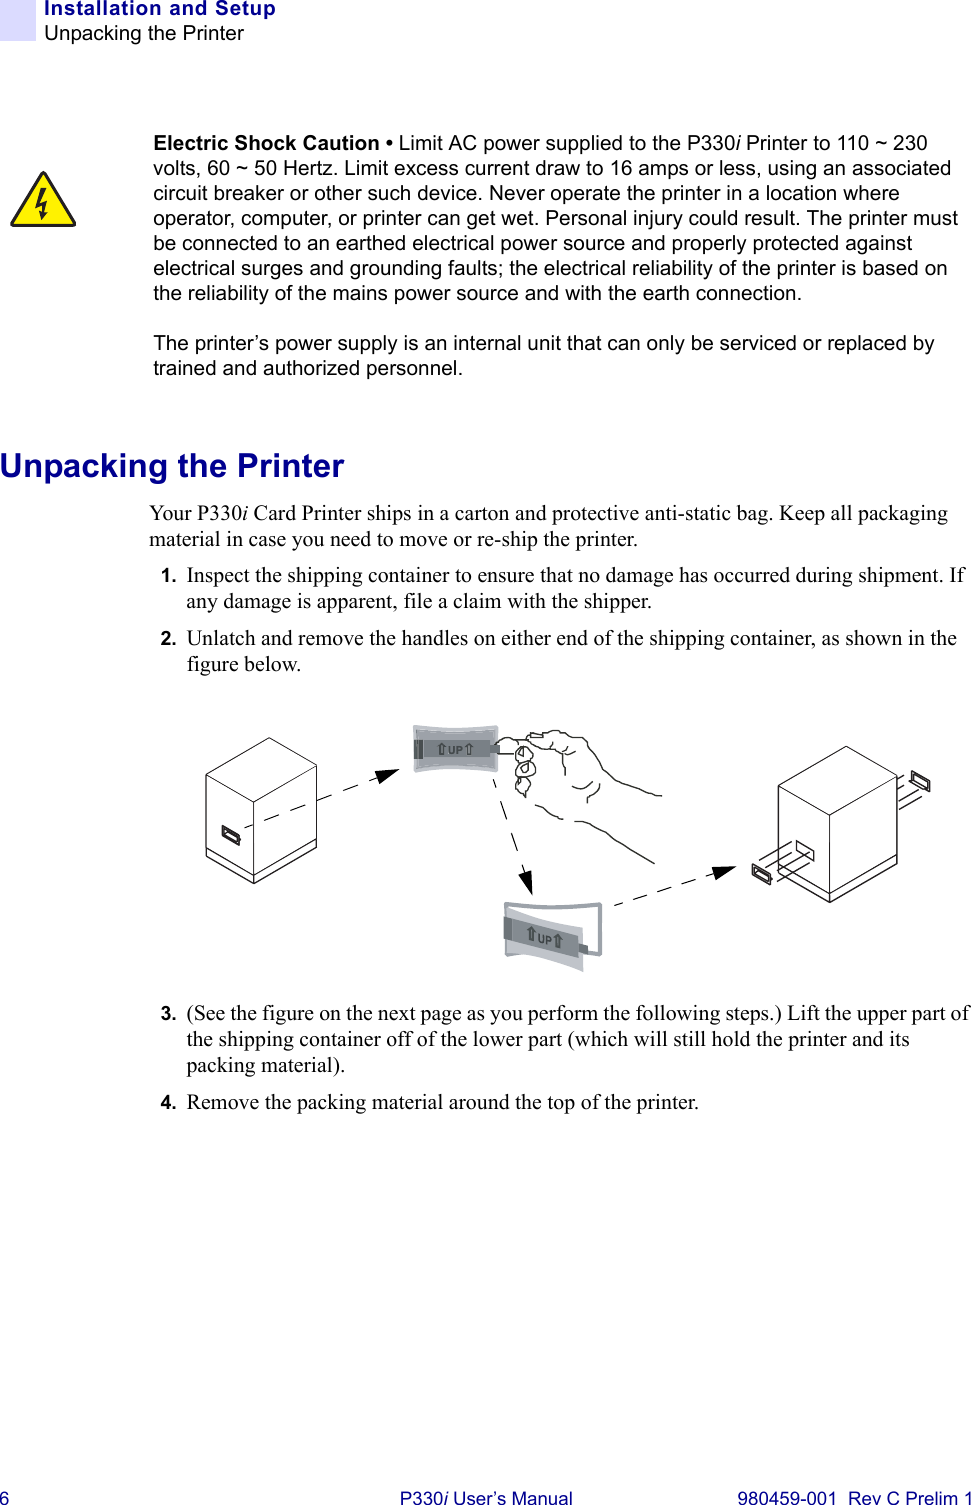 6 P330i User’s Manual 980459-001  Rev C Prelim 1Installation and SetupUnpacking the PrinterUnpacking the PrinterYour P330i Card Printer ships in a carton and protective anti-static bag. Keep all packaging material in case you need to move or re-ship the printer.1. Inspect the shipping container to ensure that no damage has occurred during shipment. If any damage is apparent, file a claim with the shipper.2. Unlatch and remove the handles on either end of the shipping container, as shown in the figure below.3. (See the figure on the next page as you perform the following steps.) Lift the upper part of the shipping container off of the lower part (which will still hold the printer and its packing material).4. Remove the packing material around the top of the printer.Electric Shock Caution • Limit AC power supplied to the P330i Printer to 110 ~ 230 volts, 60 ~ 50 Hertz. Limit excess current draw to 16 amps or less, using an associated circuit breaker or other such device. Never operate the printer in a location where operator, computer, or printer can get wet. Personal injury could result. The printer must be connected to an earthed electrical power source and properly protected against electrical surges and grounding faults; the electrical reliability of the printer is based on the reliability of the mains power source and with the earth connection.The printer’s power supply is an internal unit that can only be serviced or replaced by trained and authorized personnel.UP